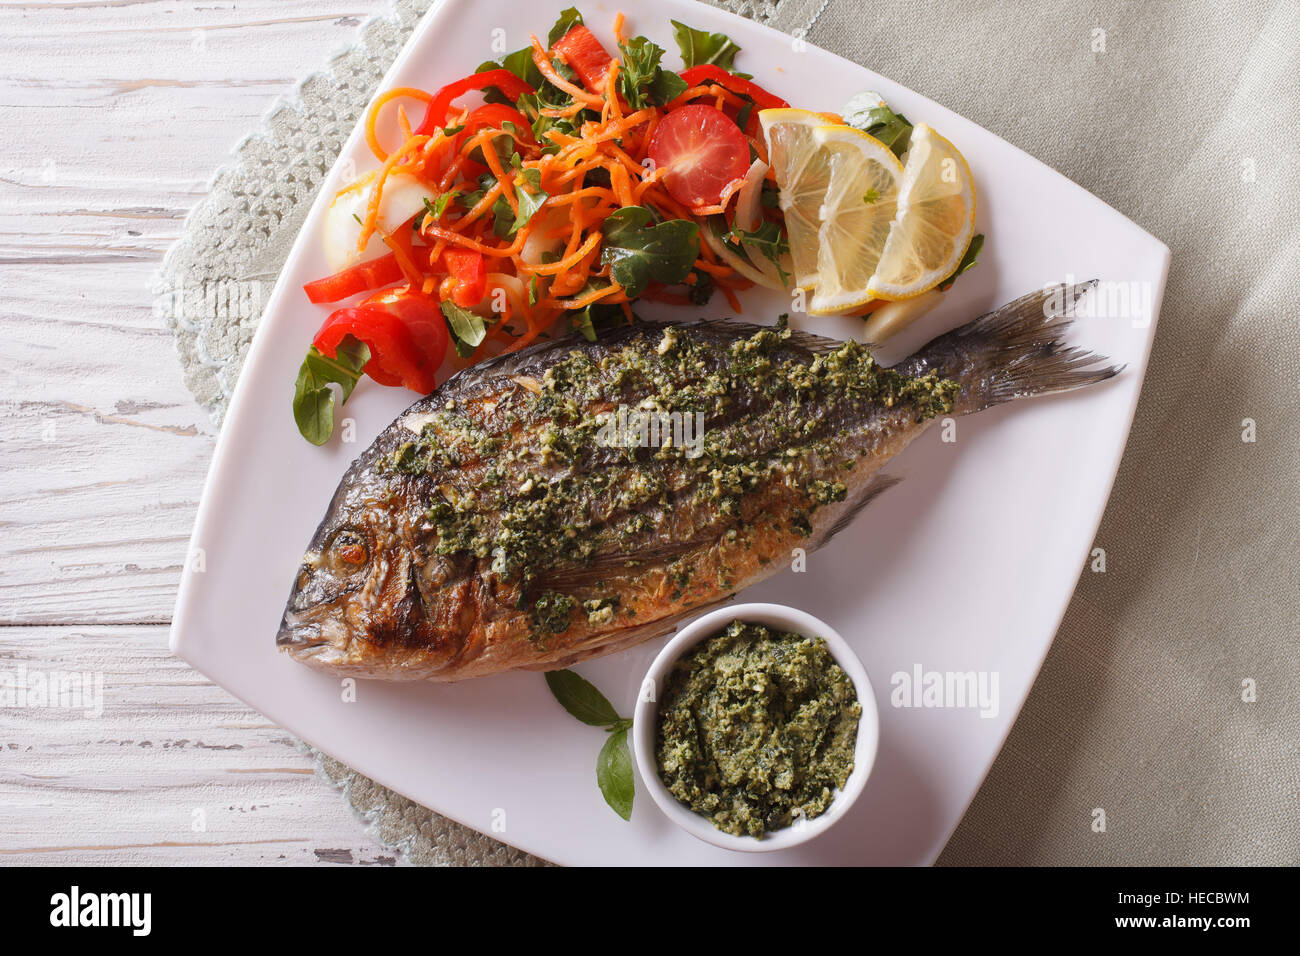 Grilled dorado fish with pesto and vegetable salad close-up on a plate. Horizonta top view Stock Photo